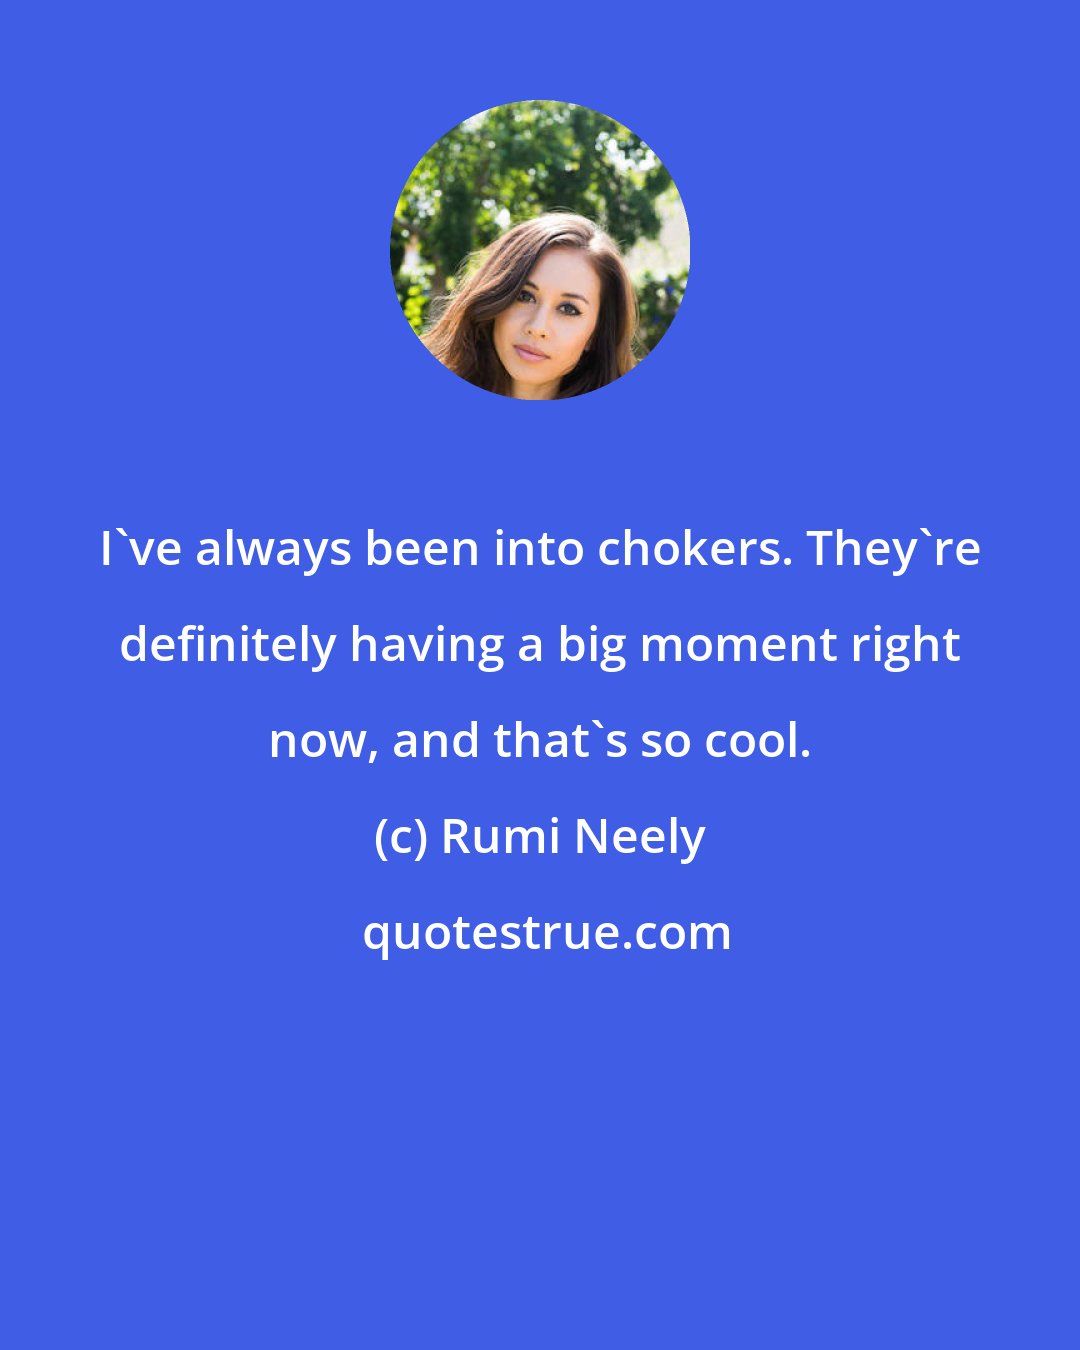 Rumi Neely: I've always been into chokers. They're definitely having a big moment right now, and that's so cool.